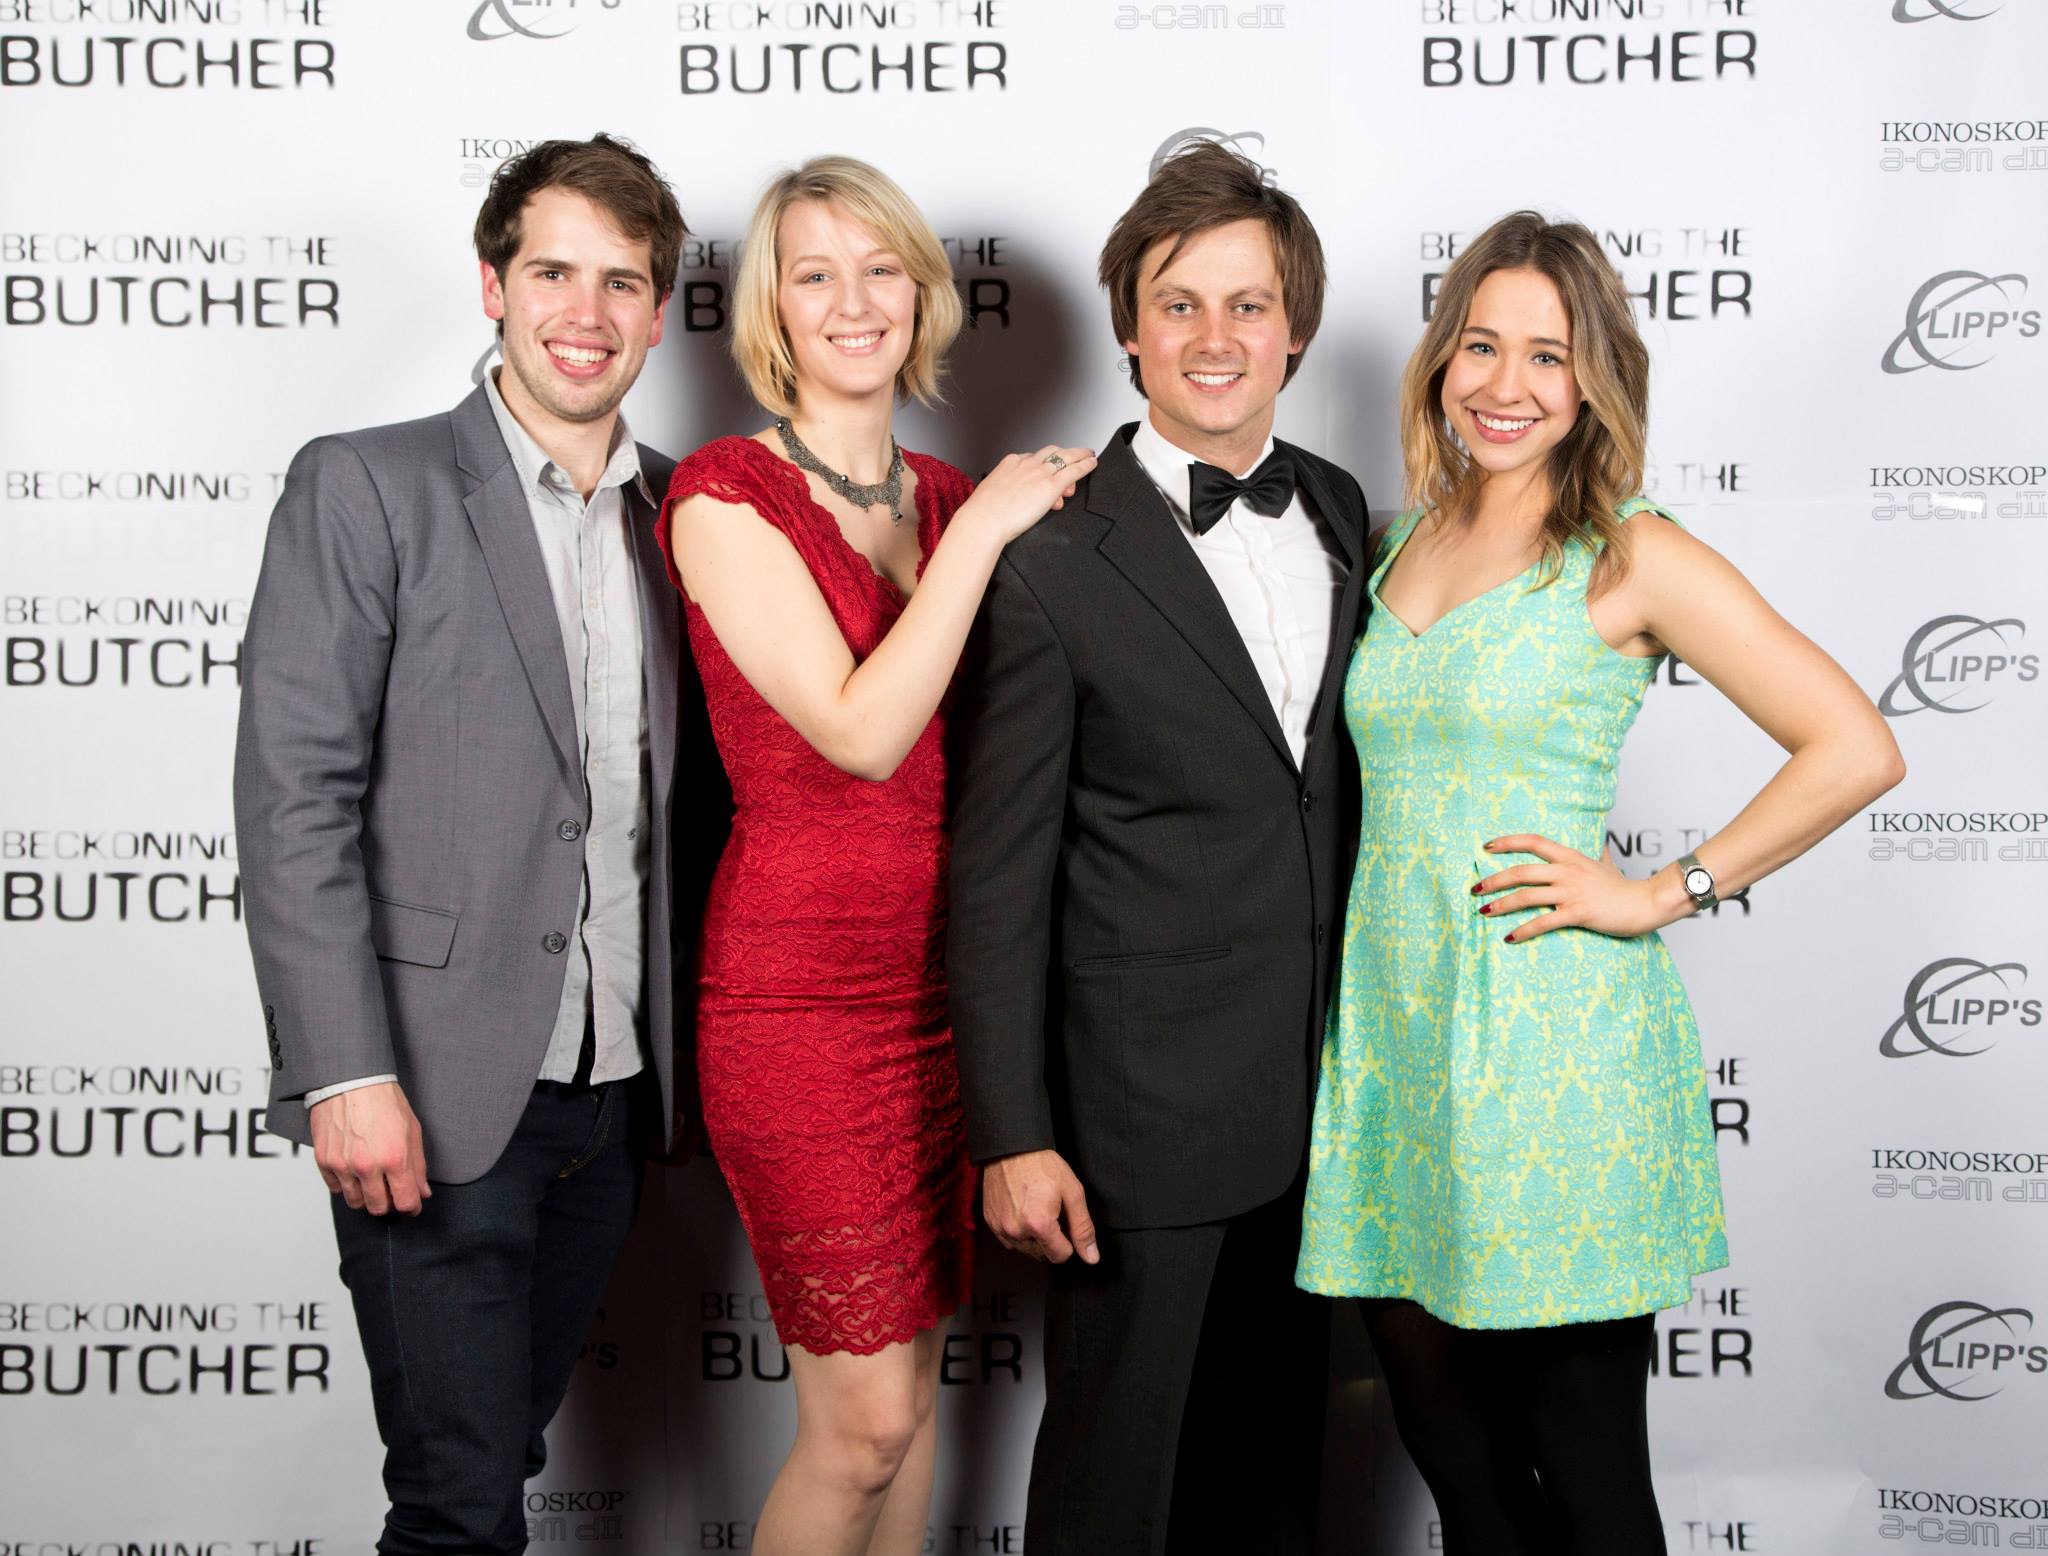 Beckoning the Butcher premiere